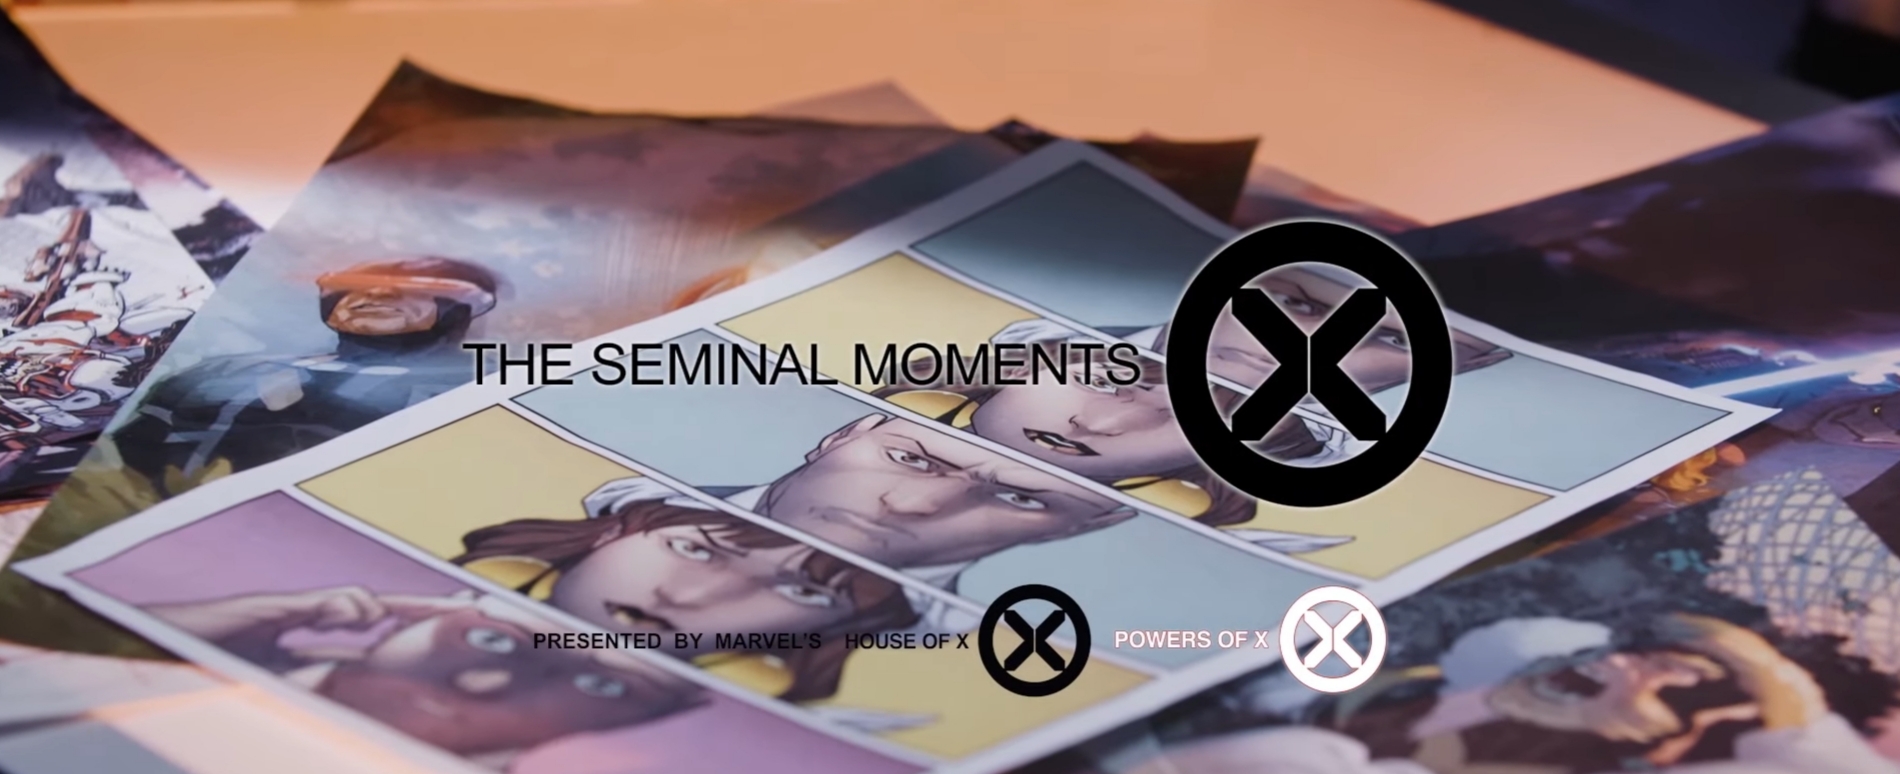 Marvel’s Seminal Moments Prepares For Hickman’s ‘House of X’ & ‘Powers of X’